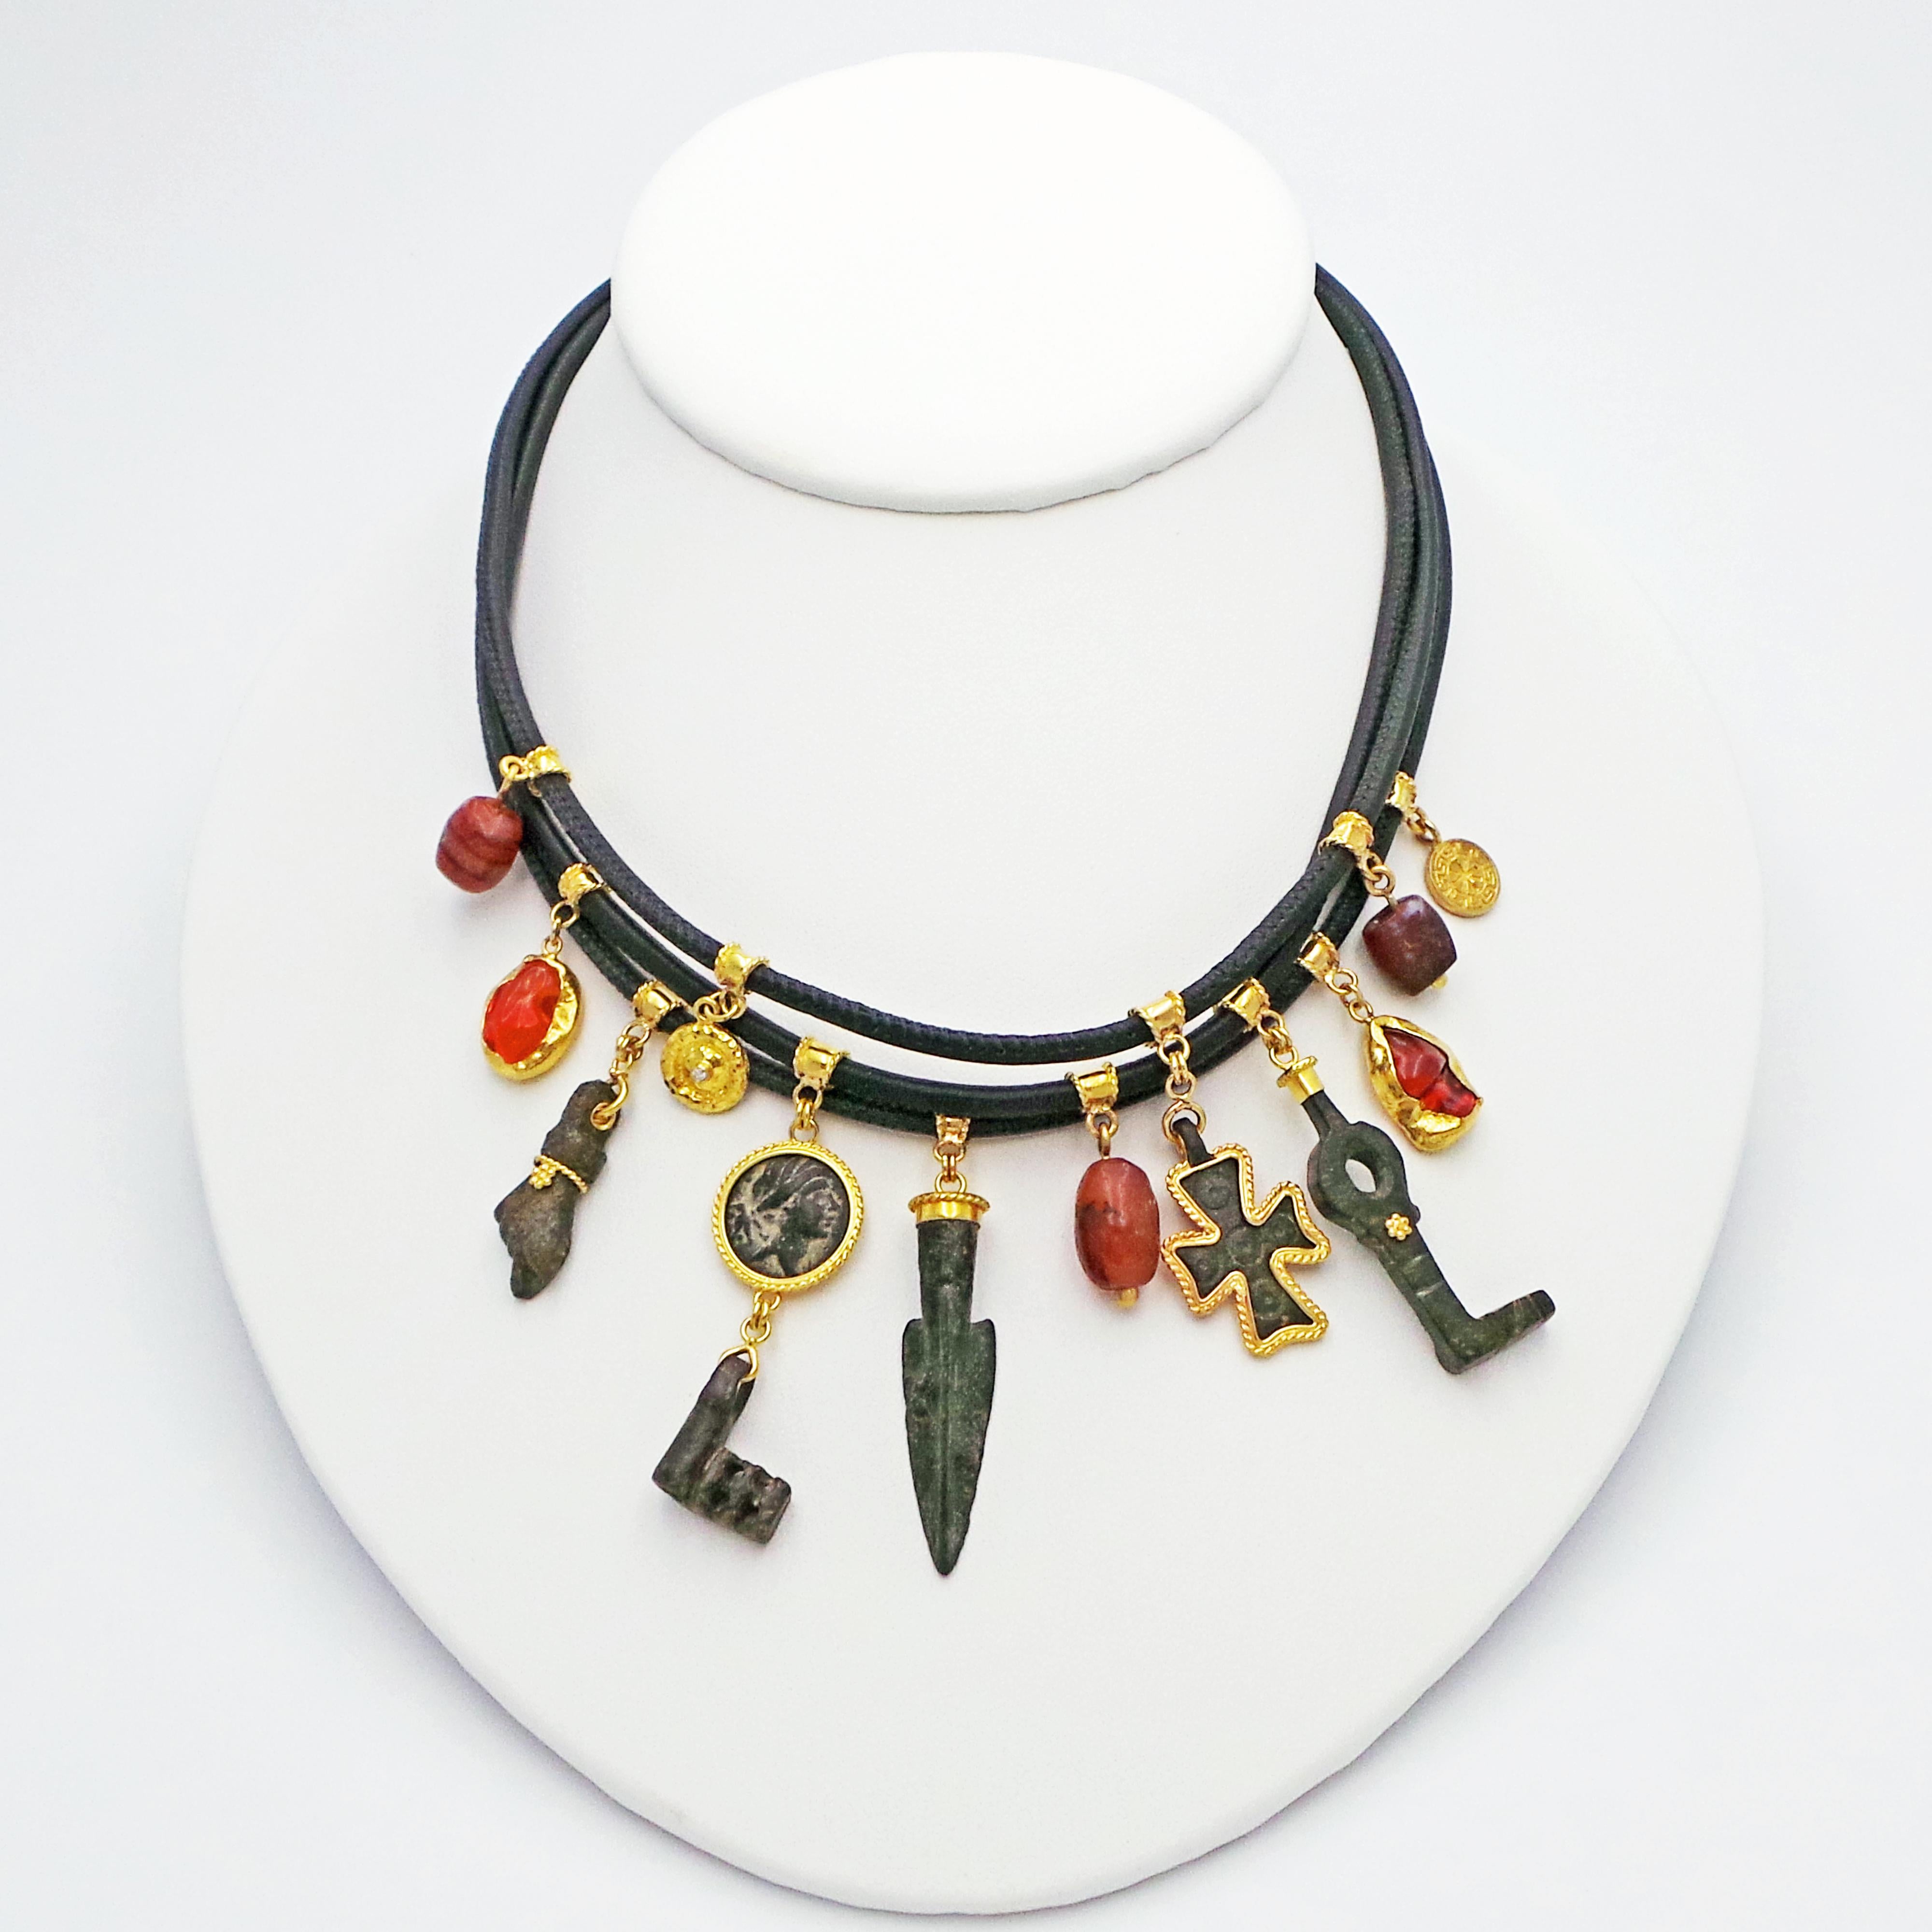 Contemporary Bohemian 3-Strand Leather Necklace with Ancient Coin, Artifacts, and Fire Opals 